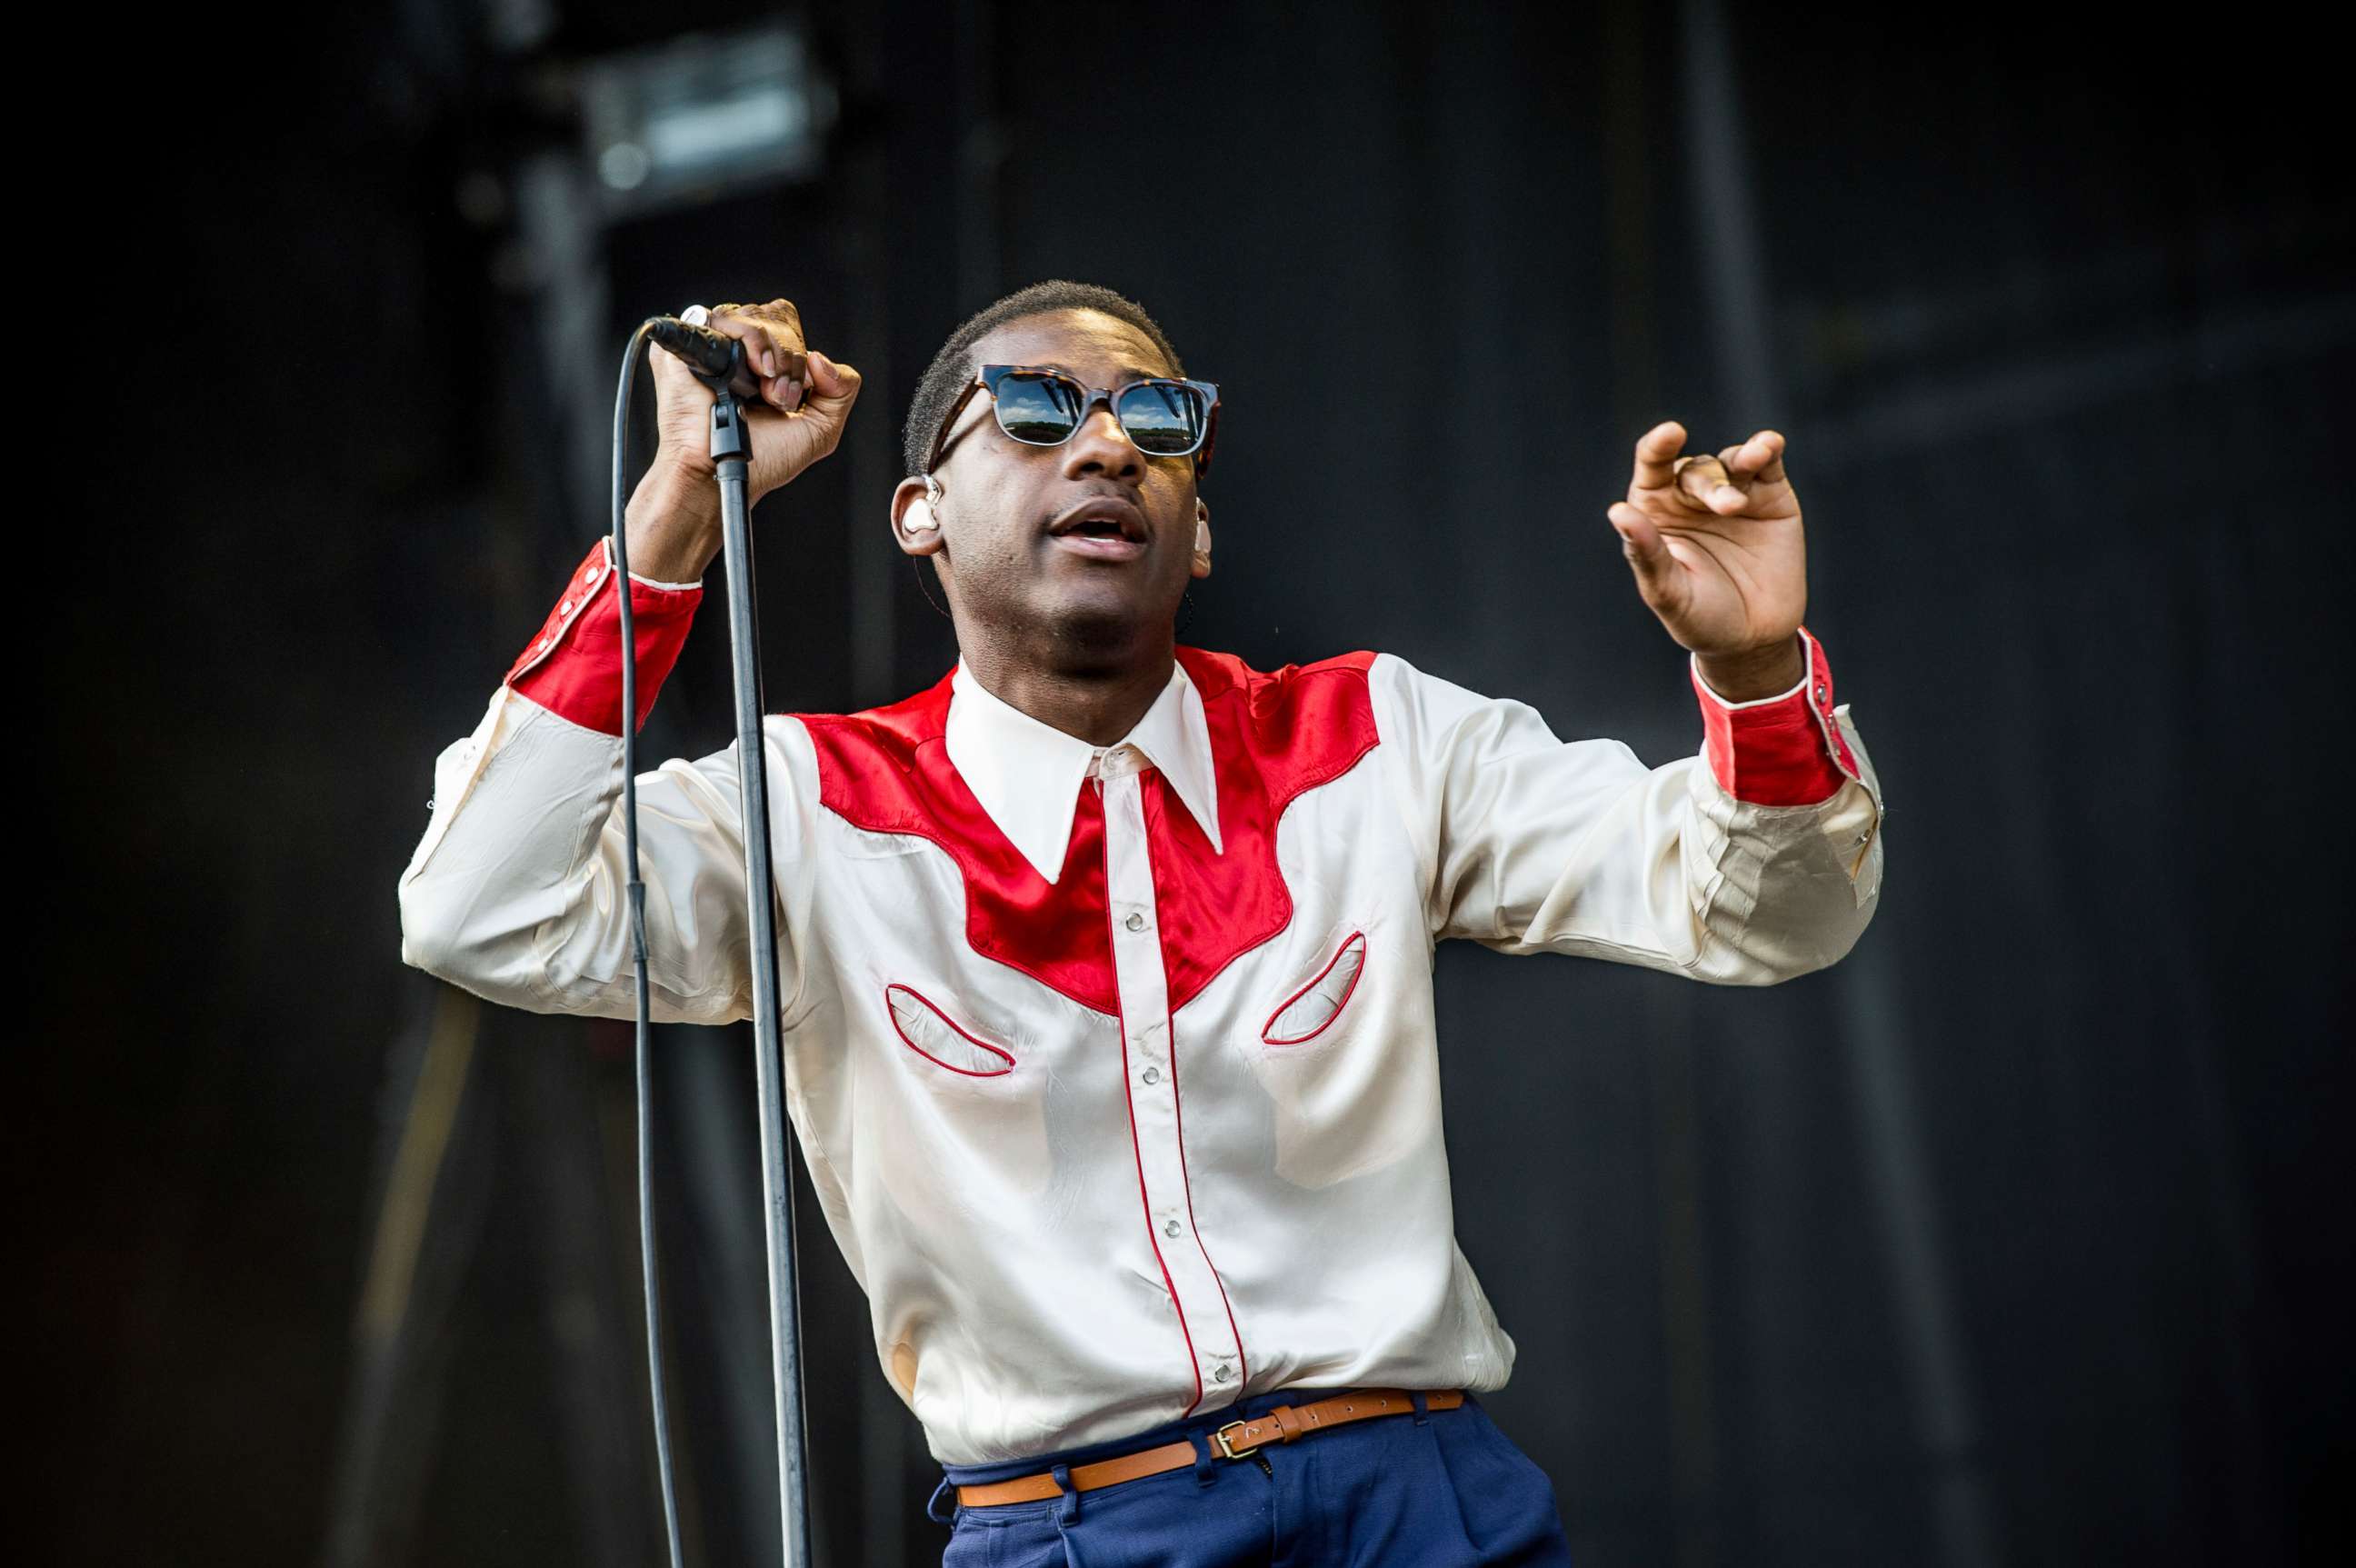 PHOTO: This July 30, 2016 file photo shows Leon Bridges performing at Lollapalooza in Chicago. 